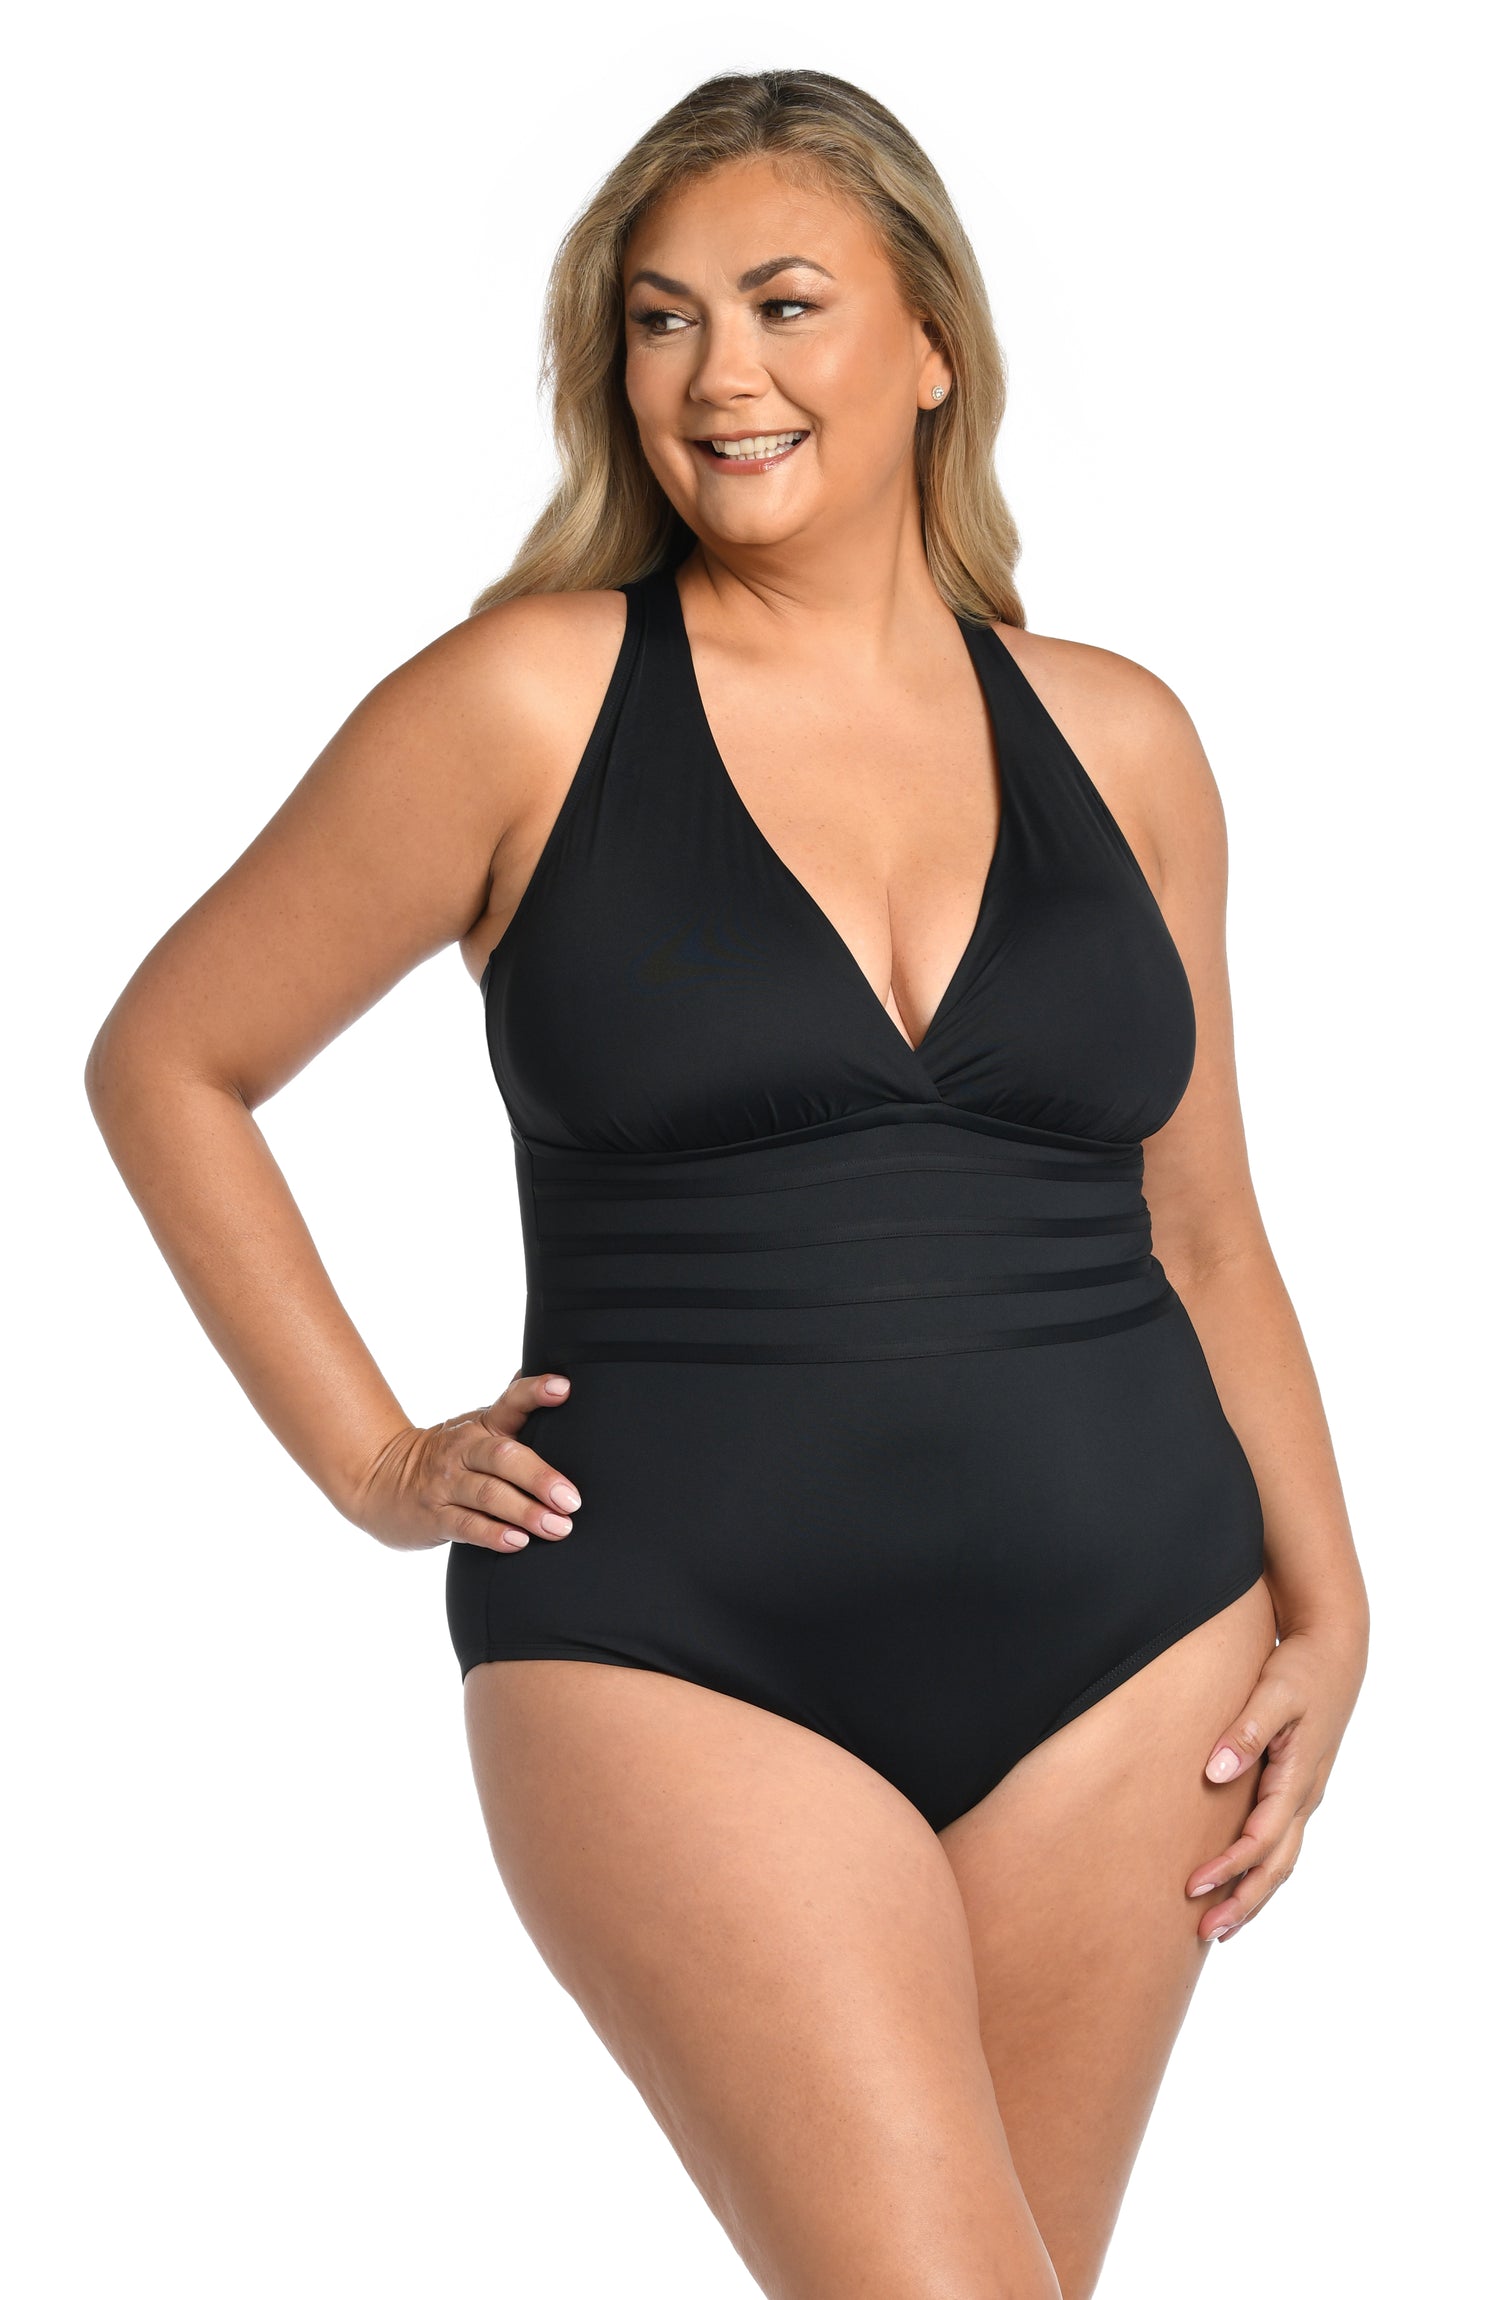 Beach Babe Black Neoprene one piece male to female transformation swimsuit/ wetsuit